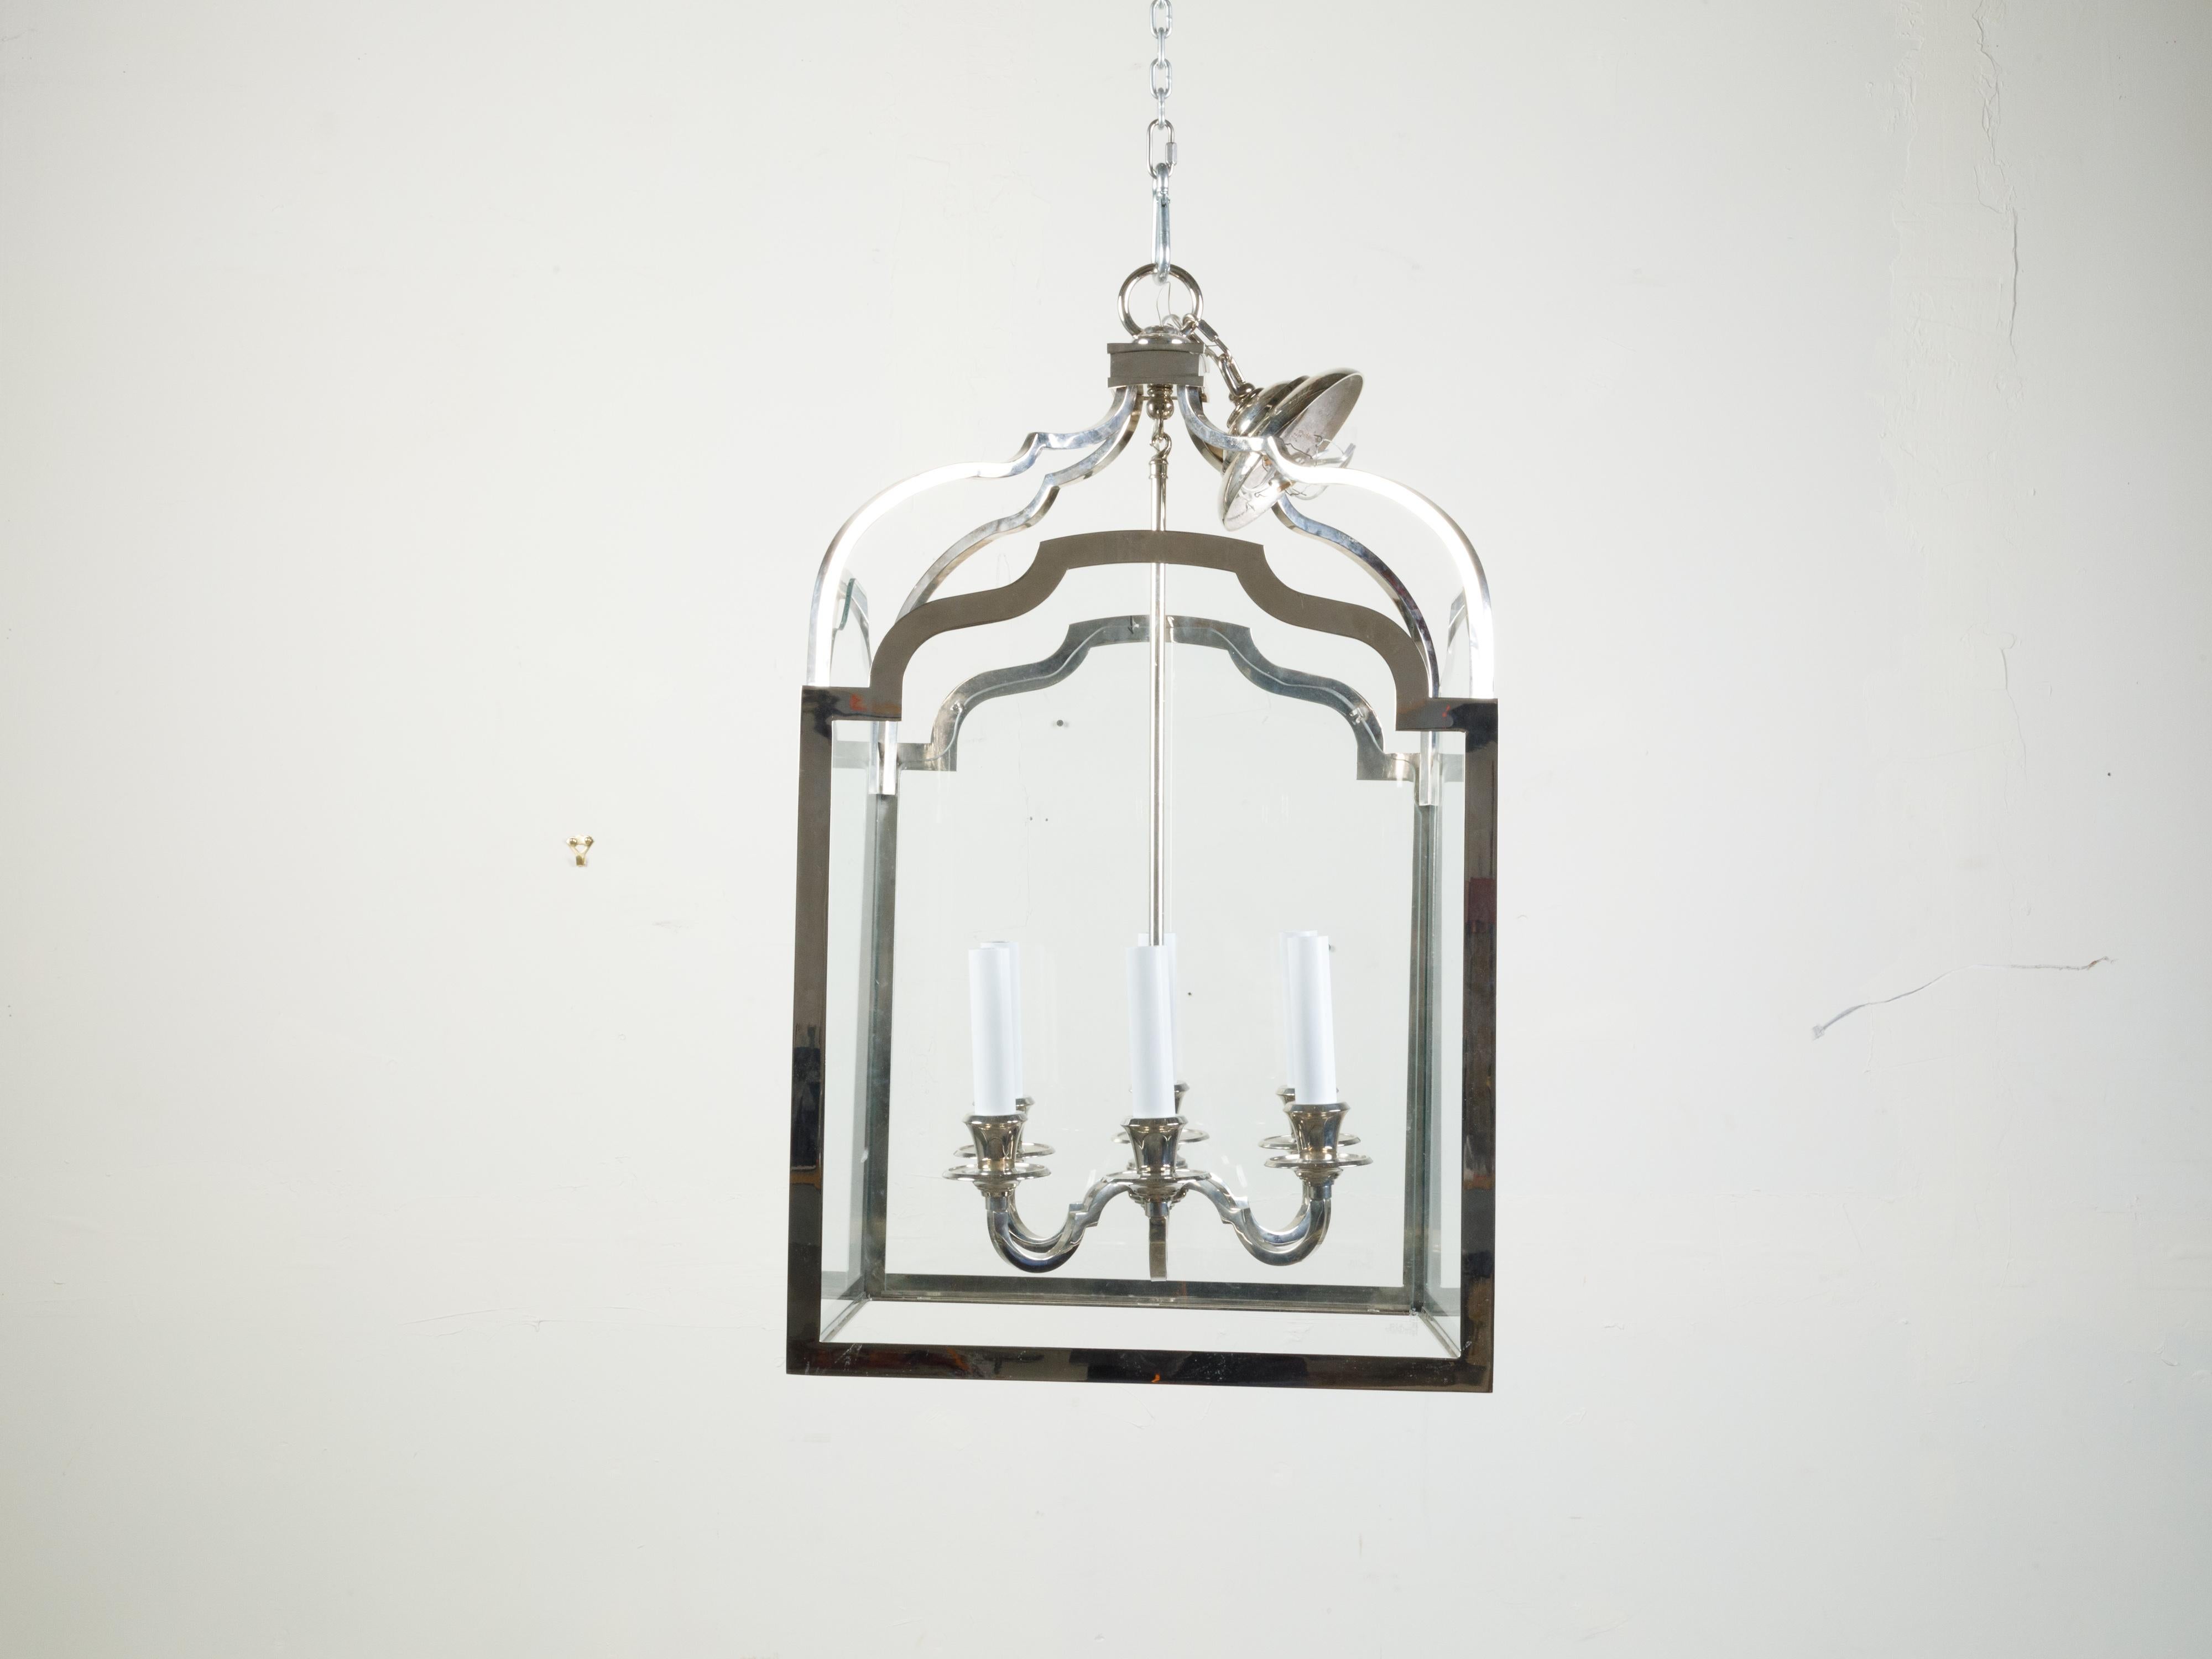 A vintage French nickel six-light lantern from the mid 20th century, with shaped glass panels. Created in France during the midcentury period, this lantern features six scrolling nickel arms connected to a central shaft, secured behind glass panels